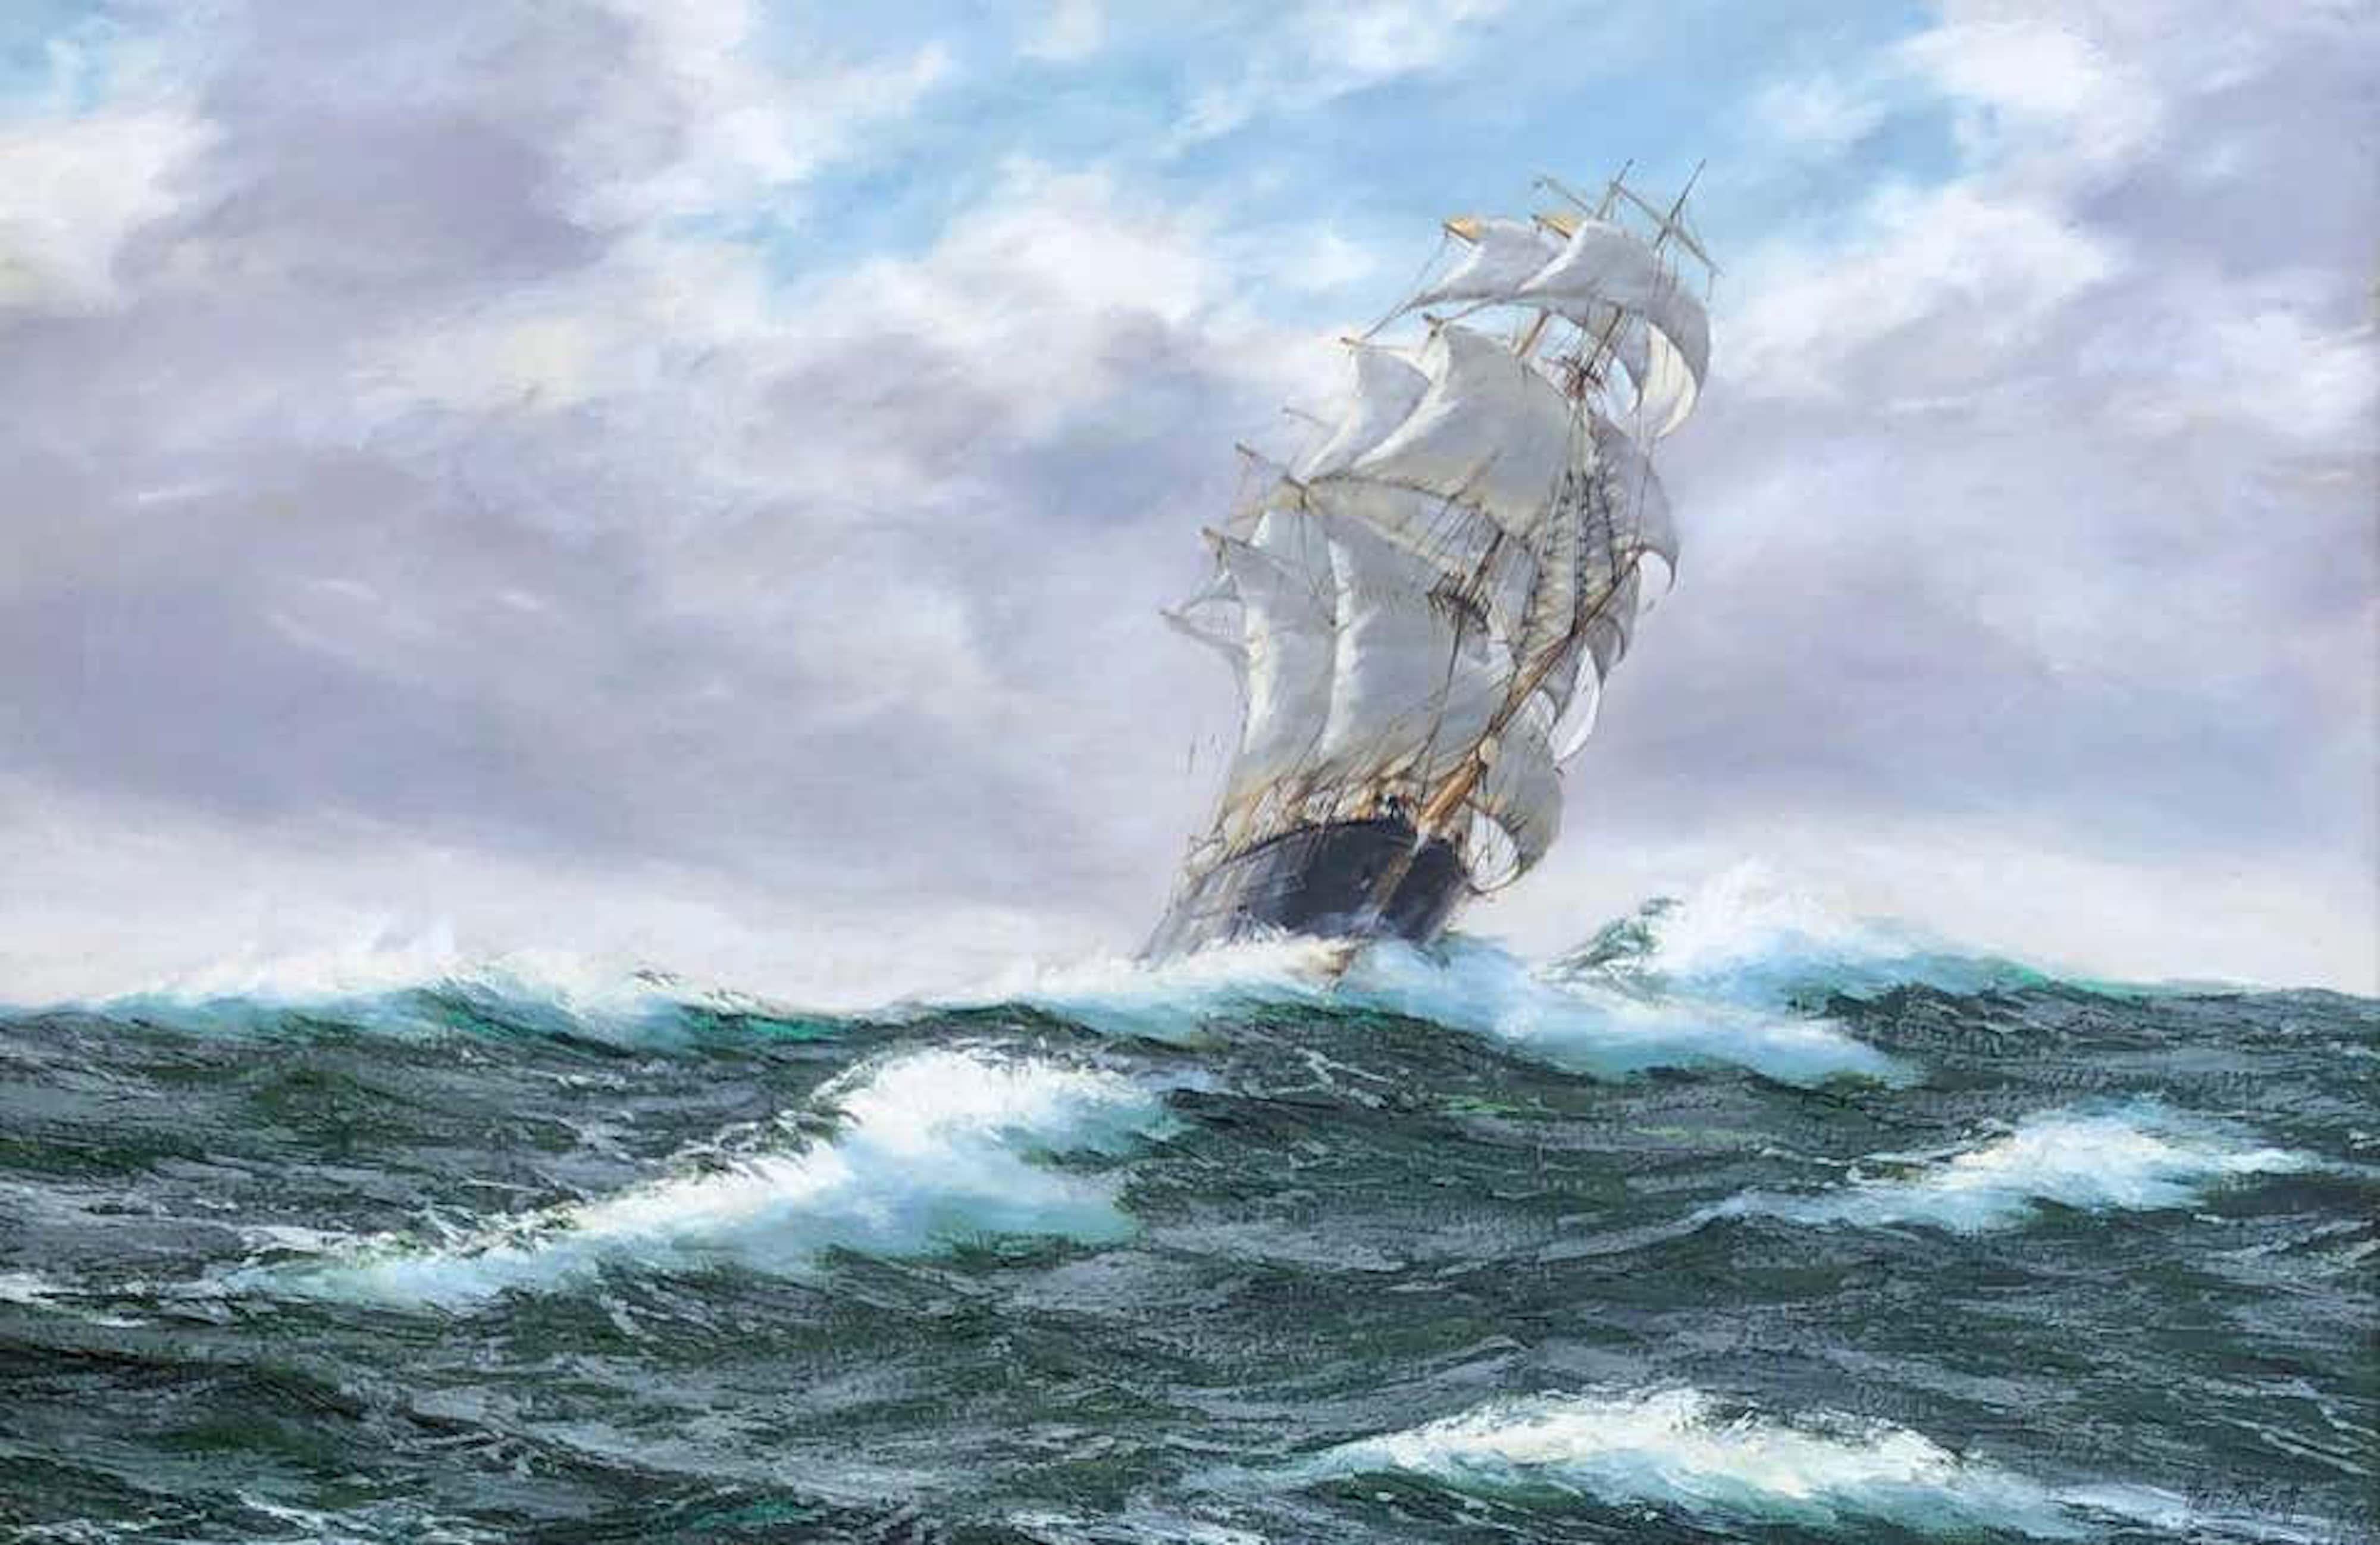 Tea Clipper in High Seas - Painting by Henry Scott